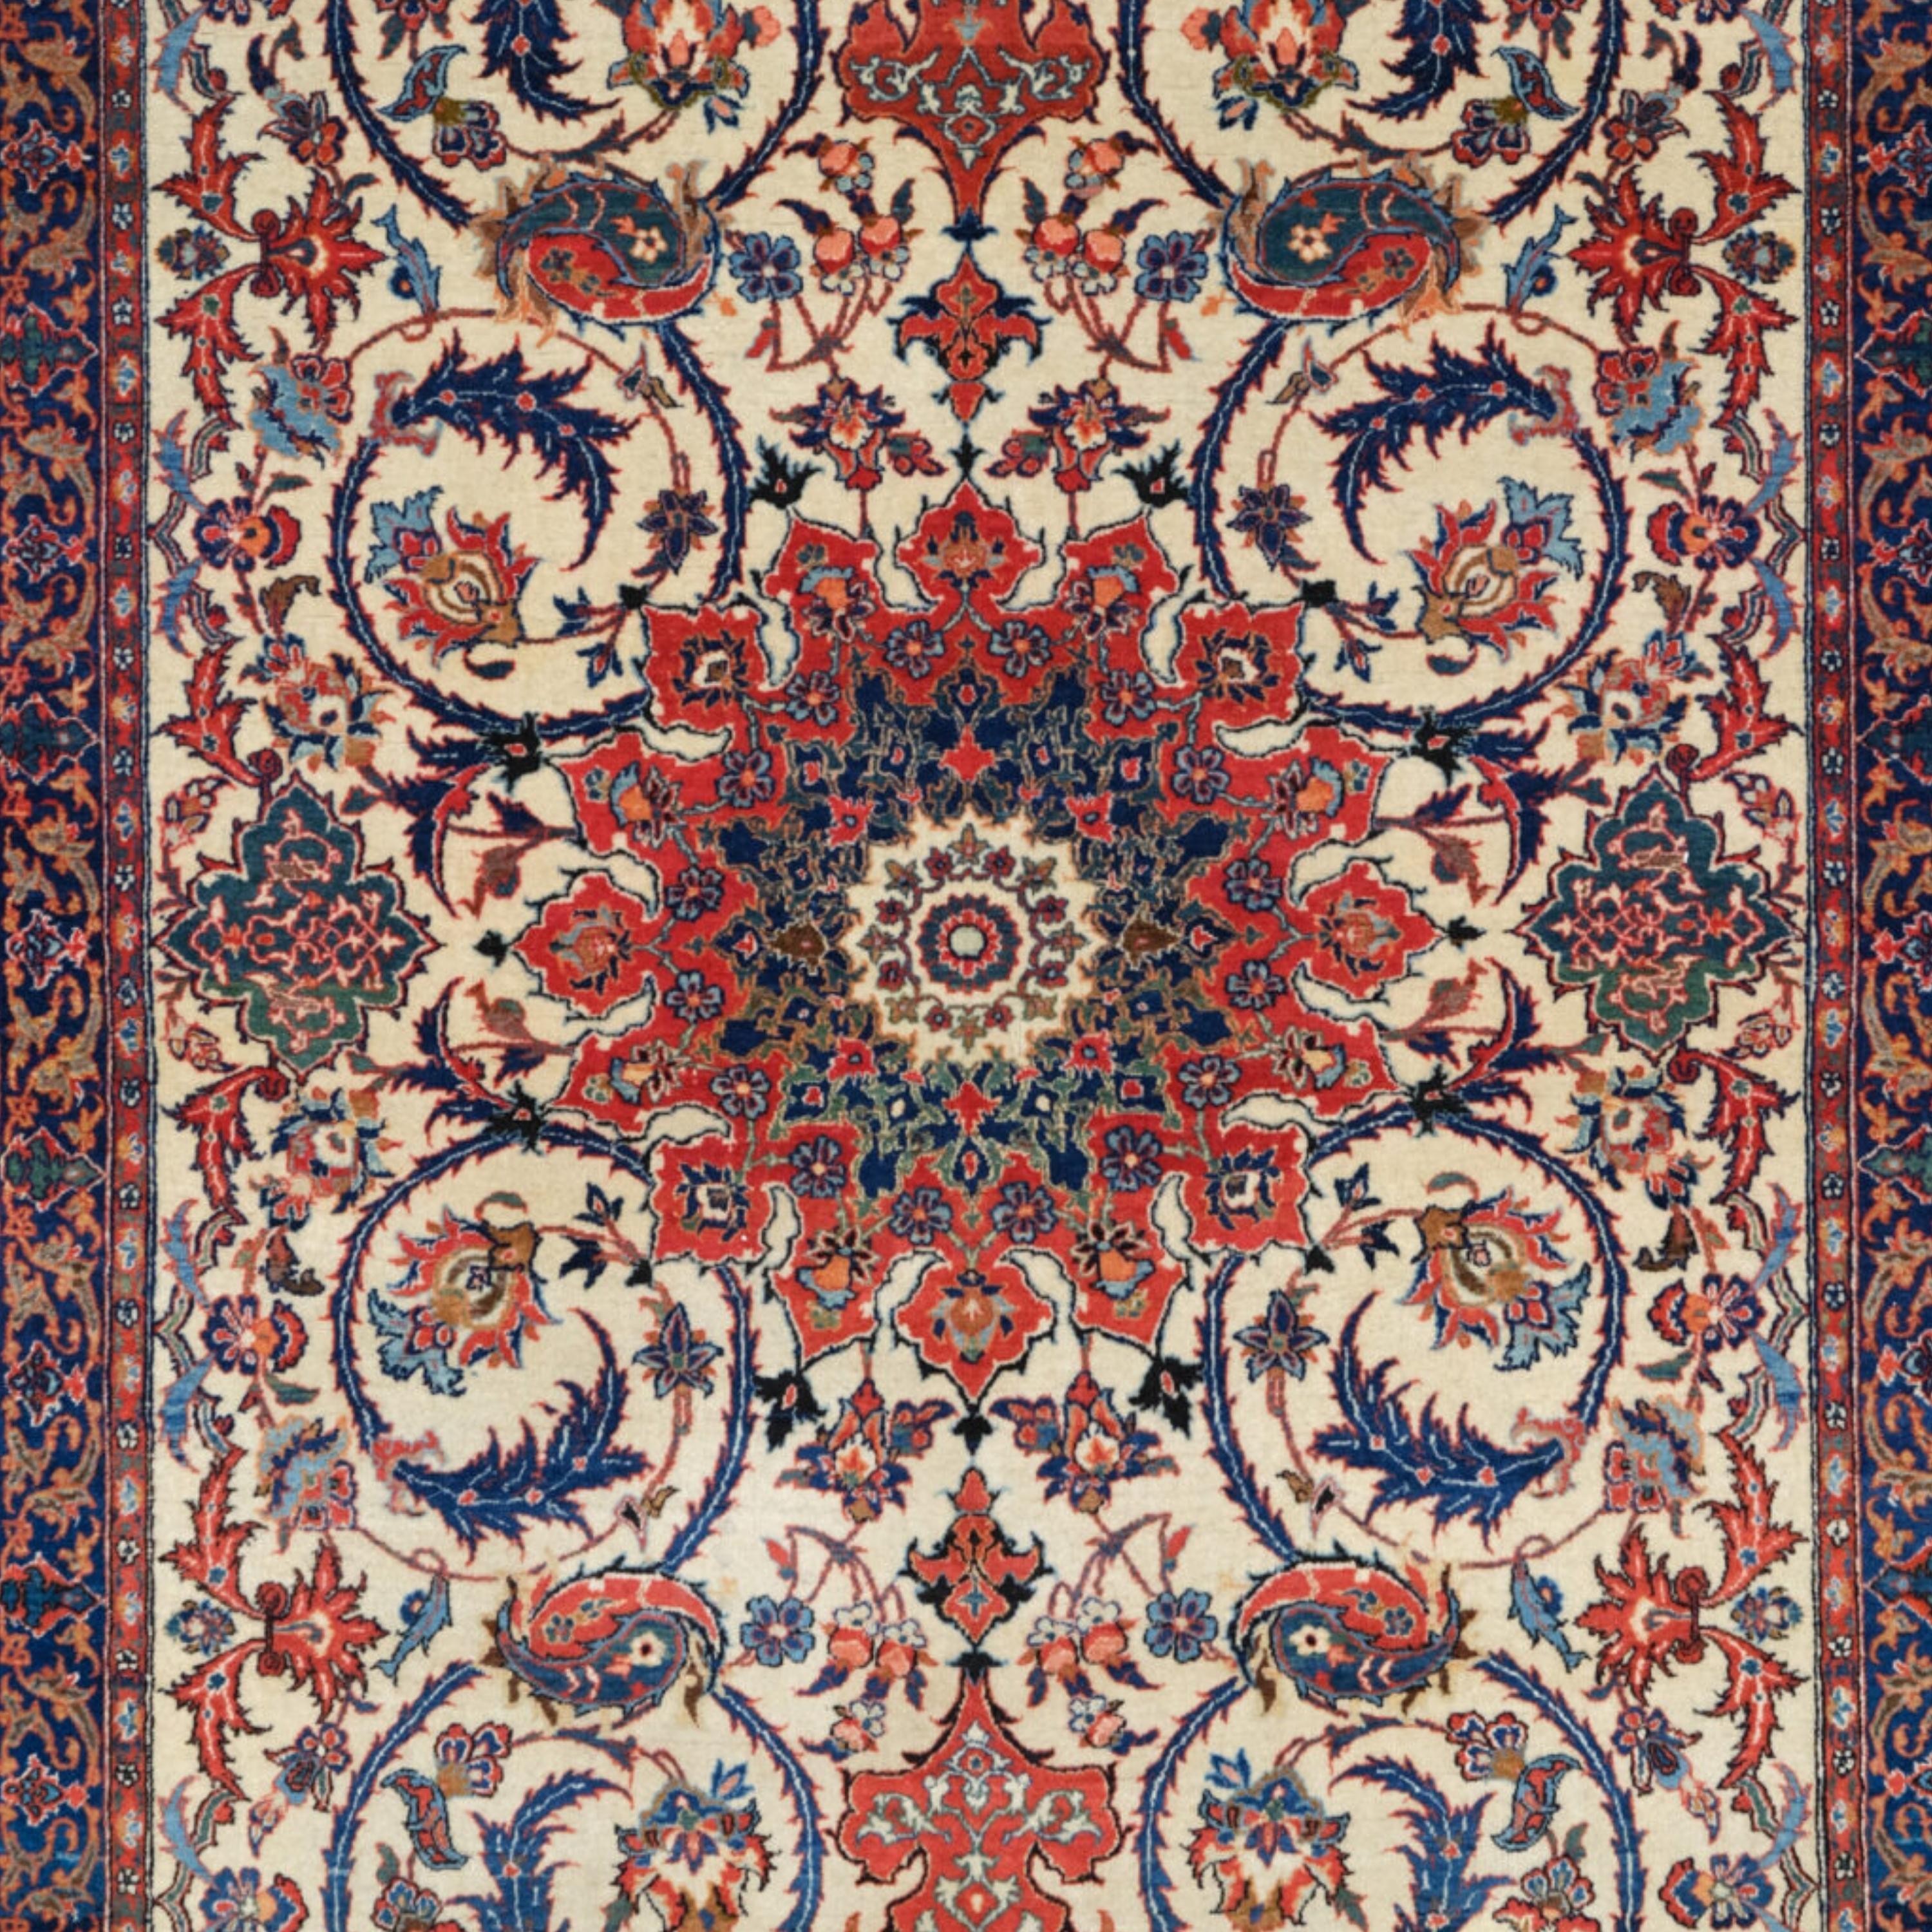 Azerbaijani Antique Isfahan Rug - Late of 19th Century Isfahan Rug, Antique Rugs For Sale